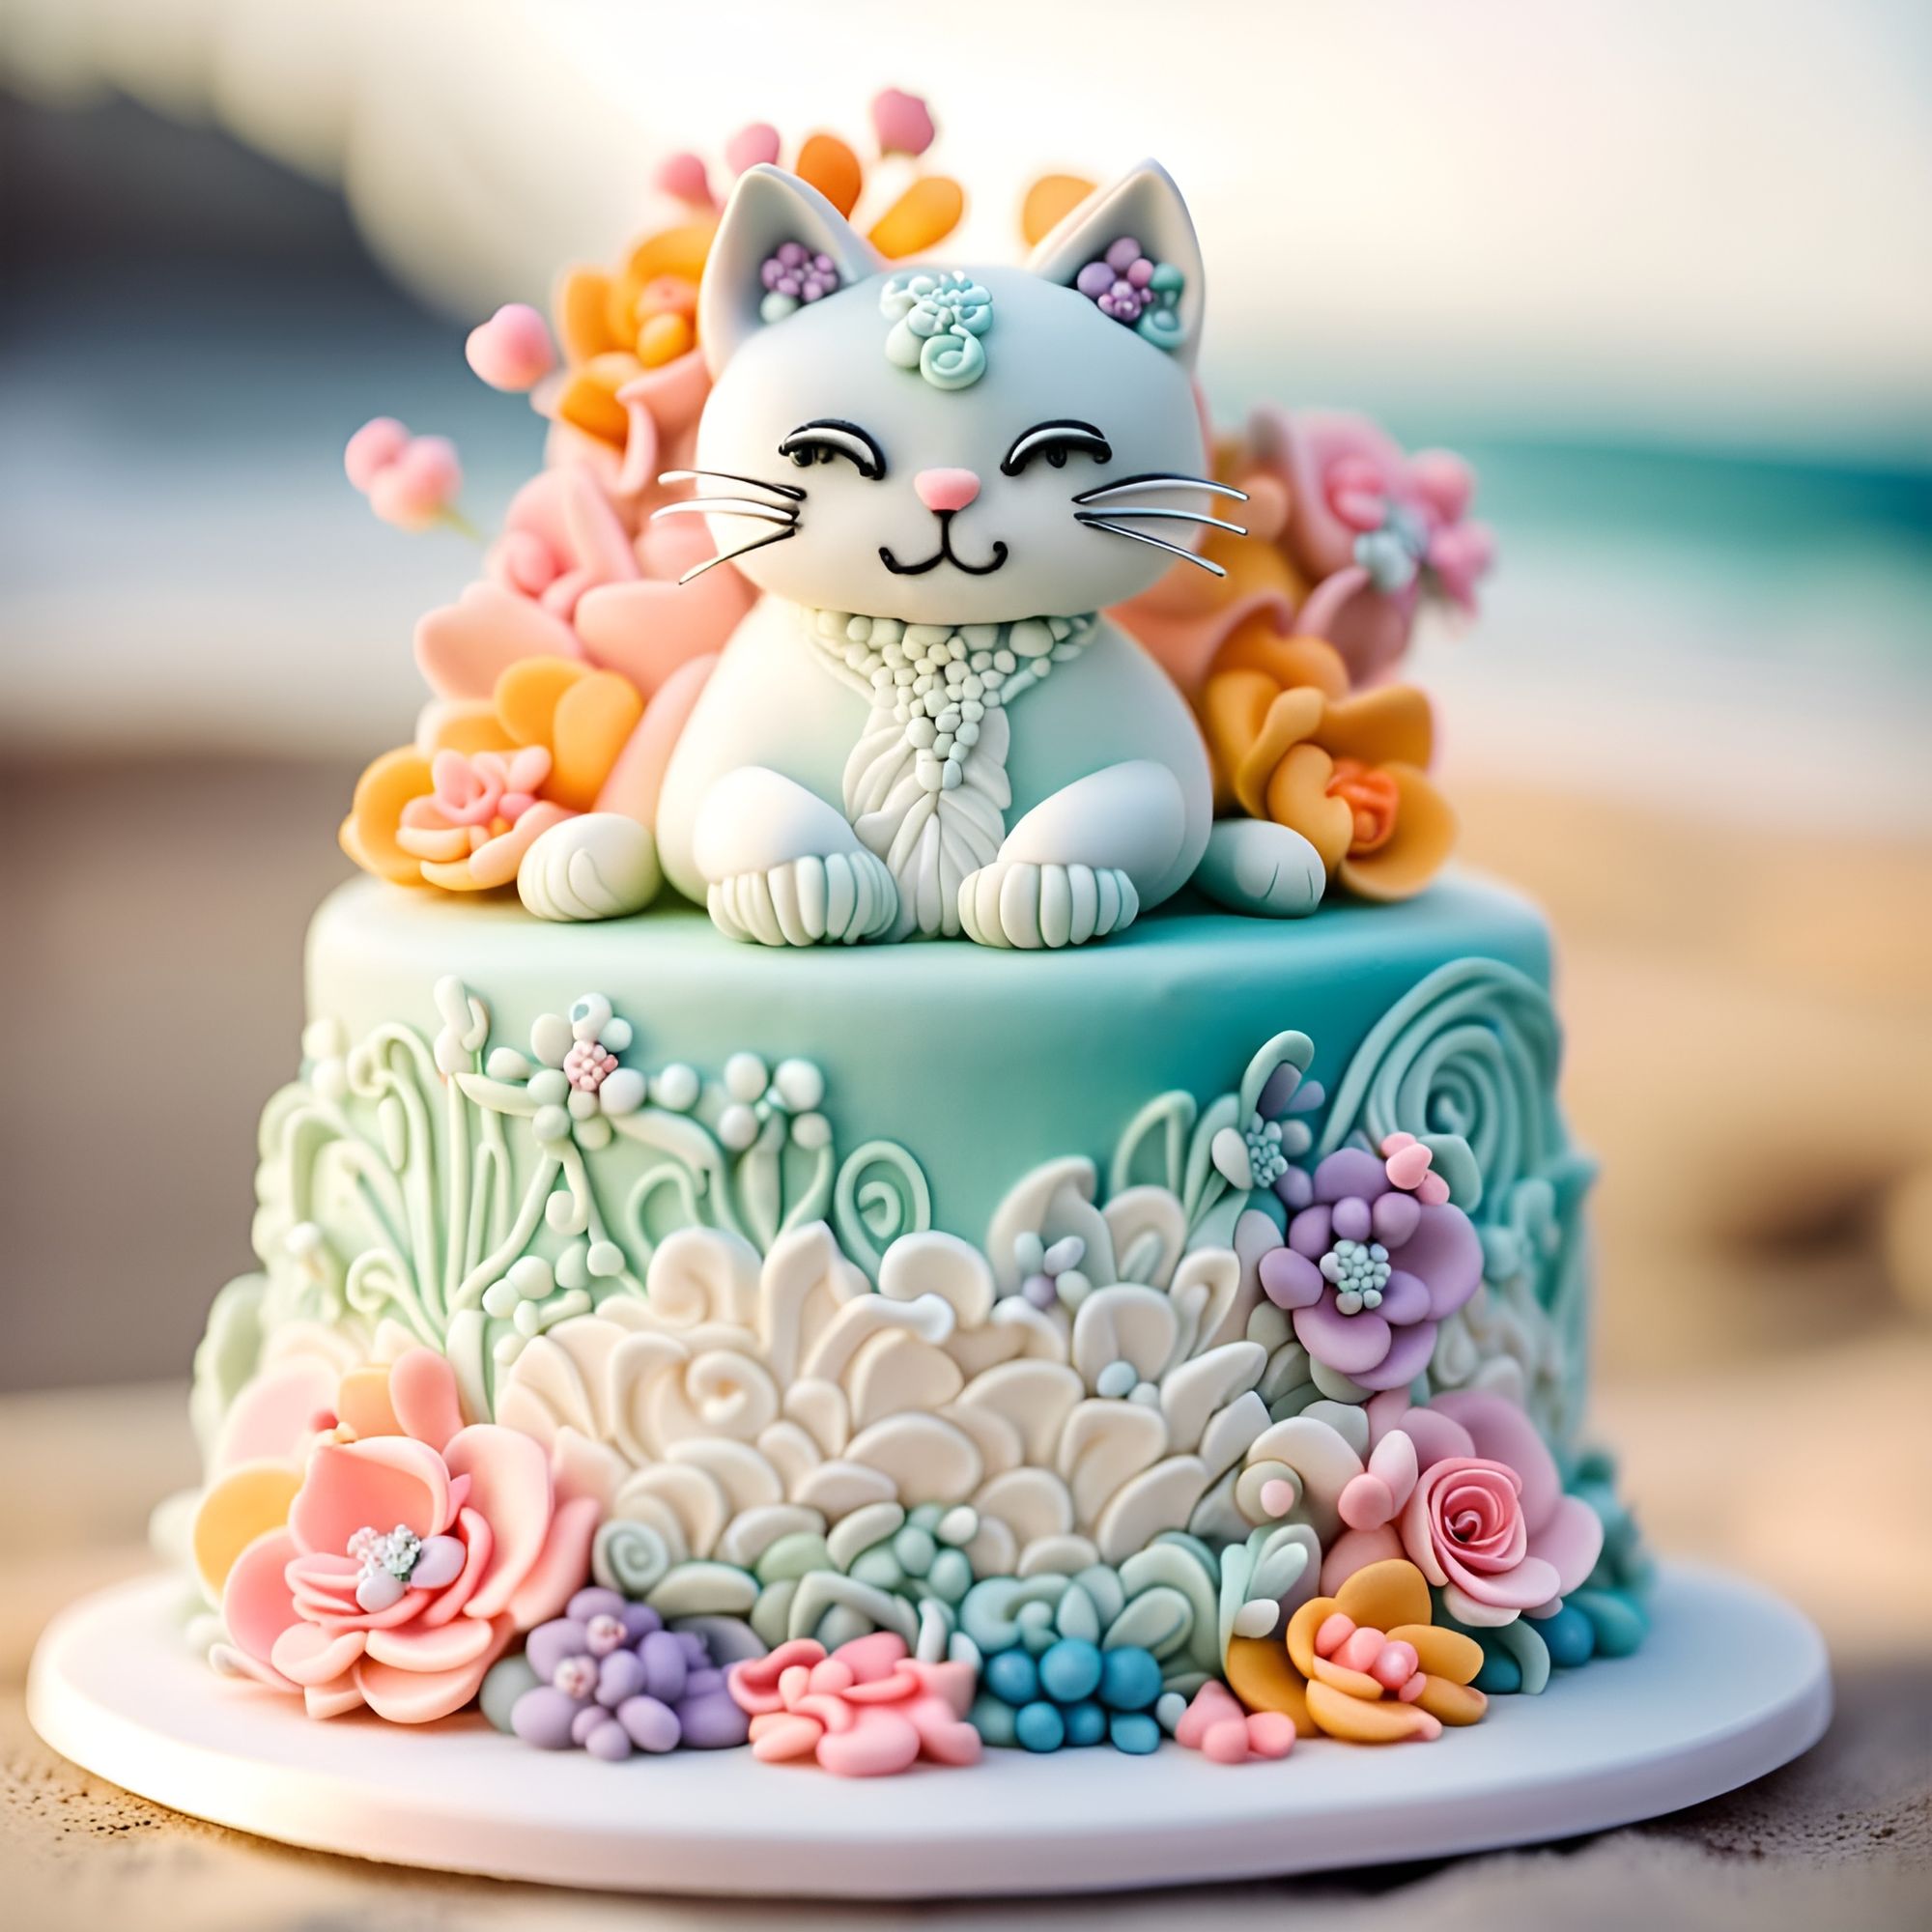 Adorable kitty cat cake for a super special birthday girl 😻 #cat #cats # kitty #catcake #cake #cakes #cakereels #reels #viral #viralre... | Instagram